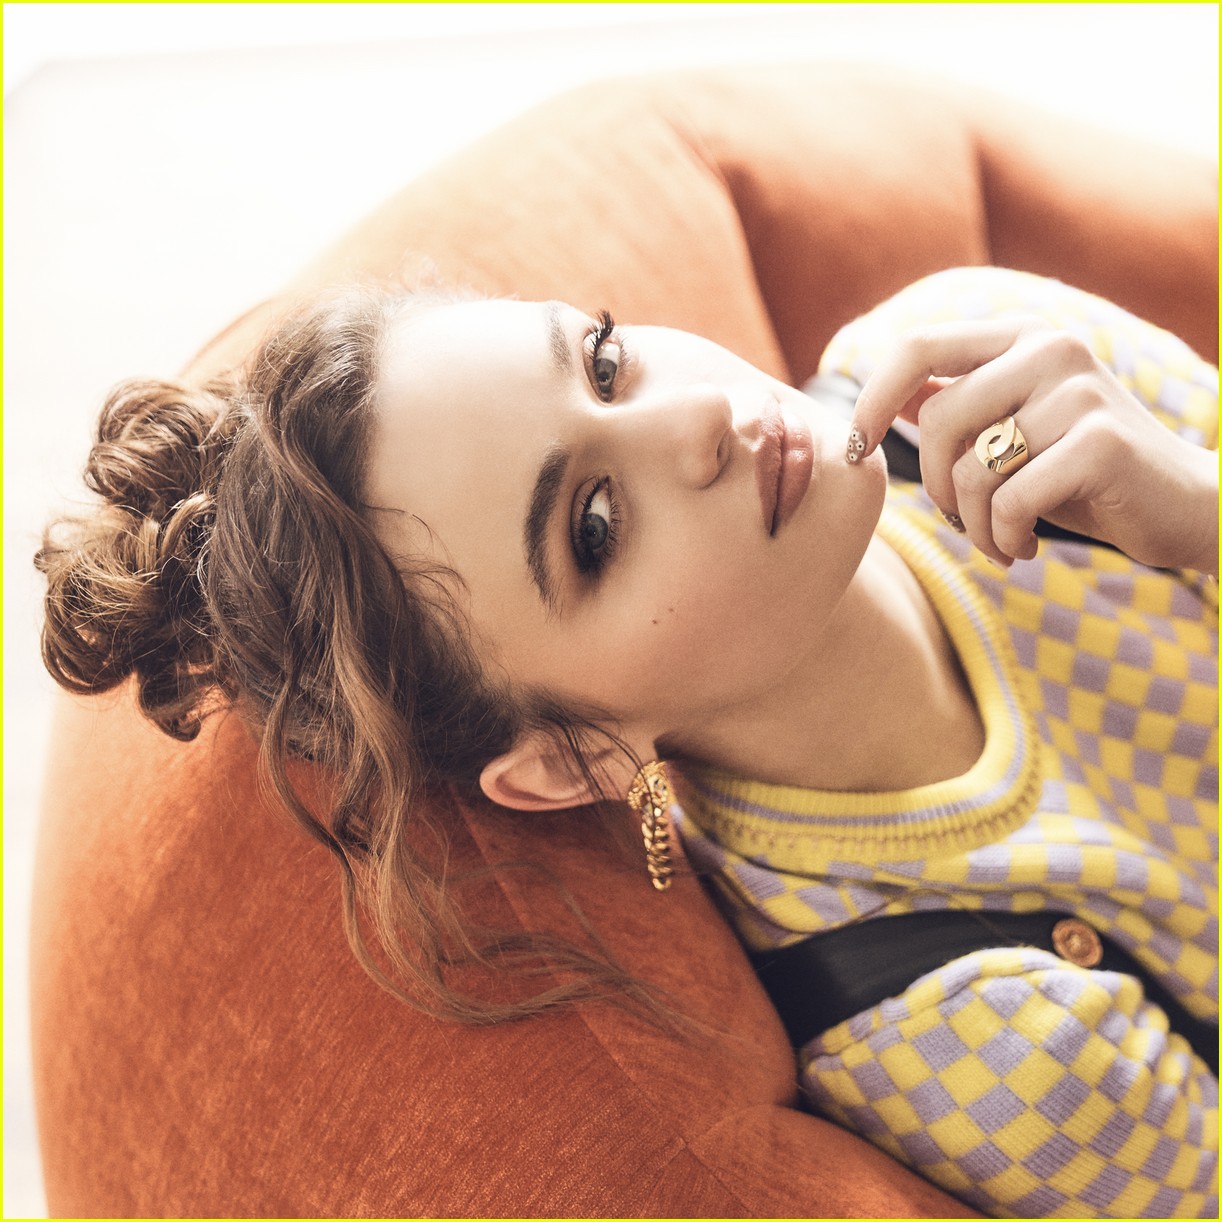 joey king says this is what led to her becoming a producer 02